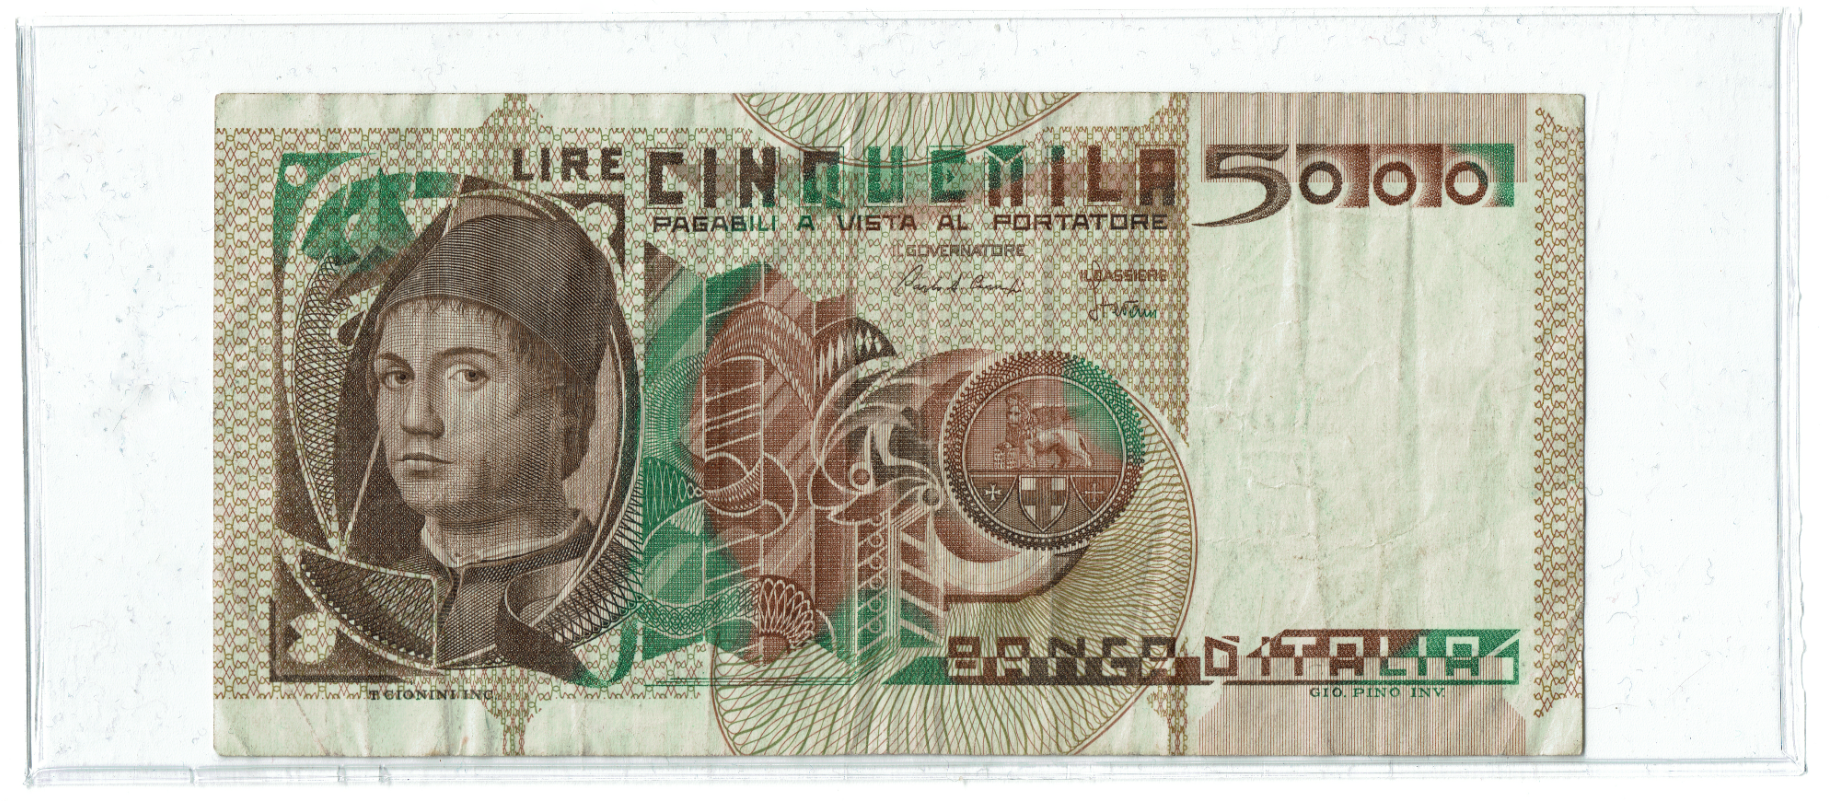 Italy 5000 Lire Banknotes_000037.png